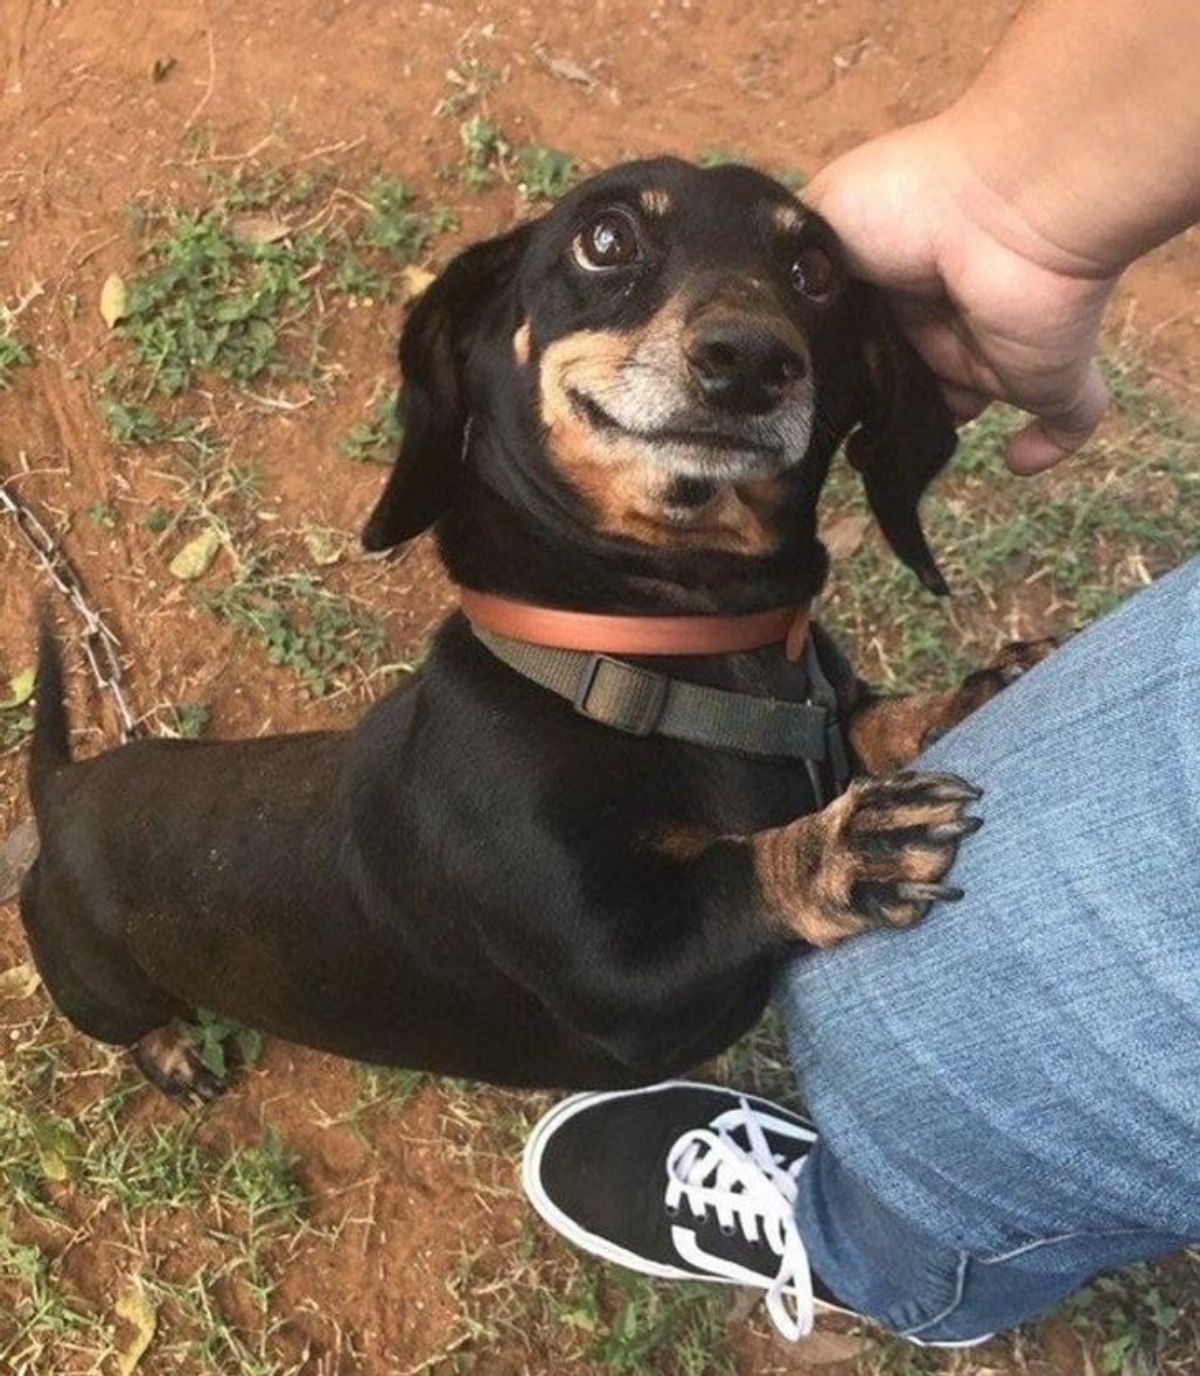 black dachshund putting front paws on someone's jean and getting patted on the head and smiling at the person